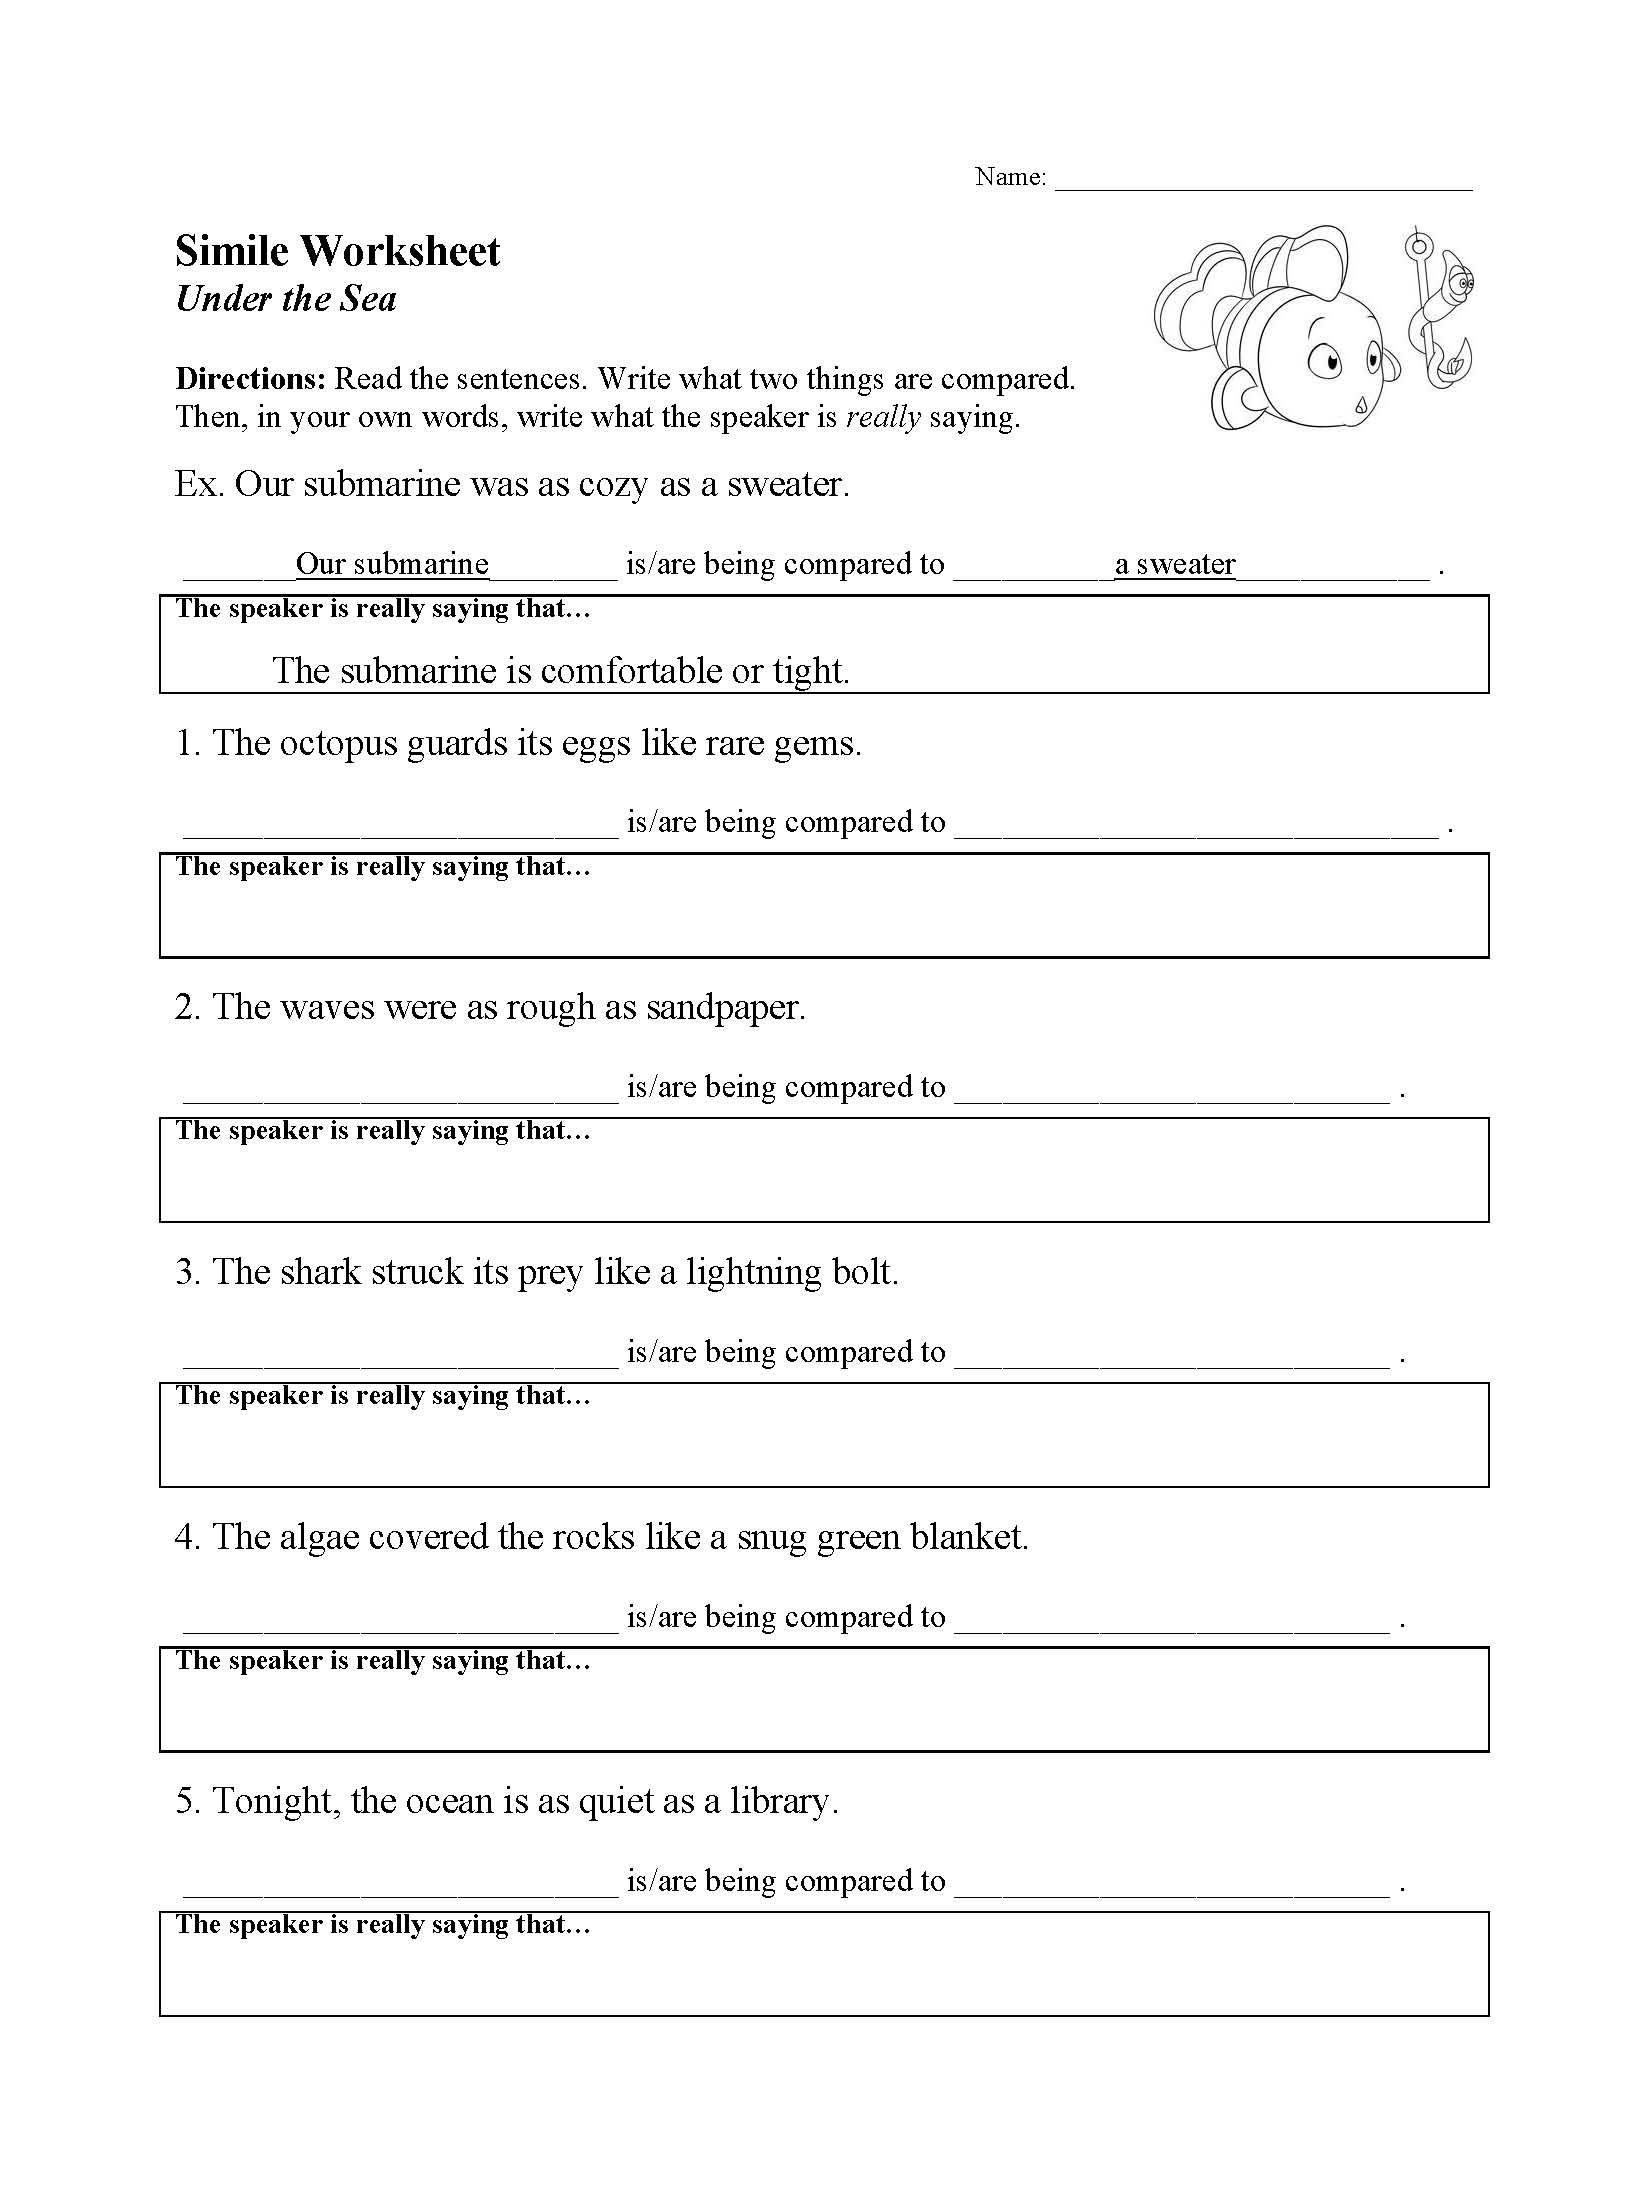 This is a preview image of our Simile Worksheet. Click on it to enlarge or view the source file.